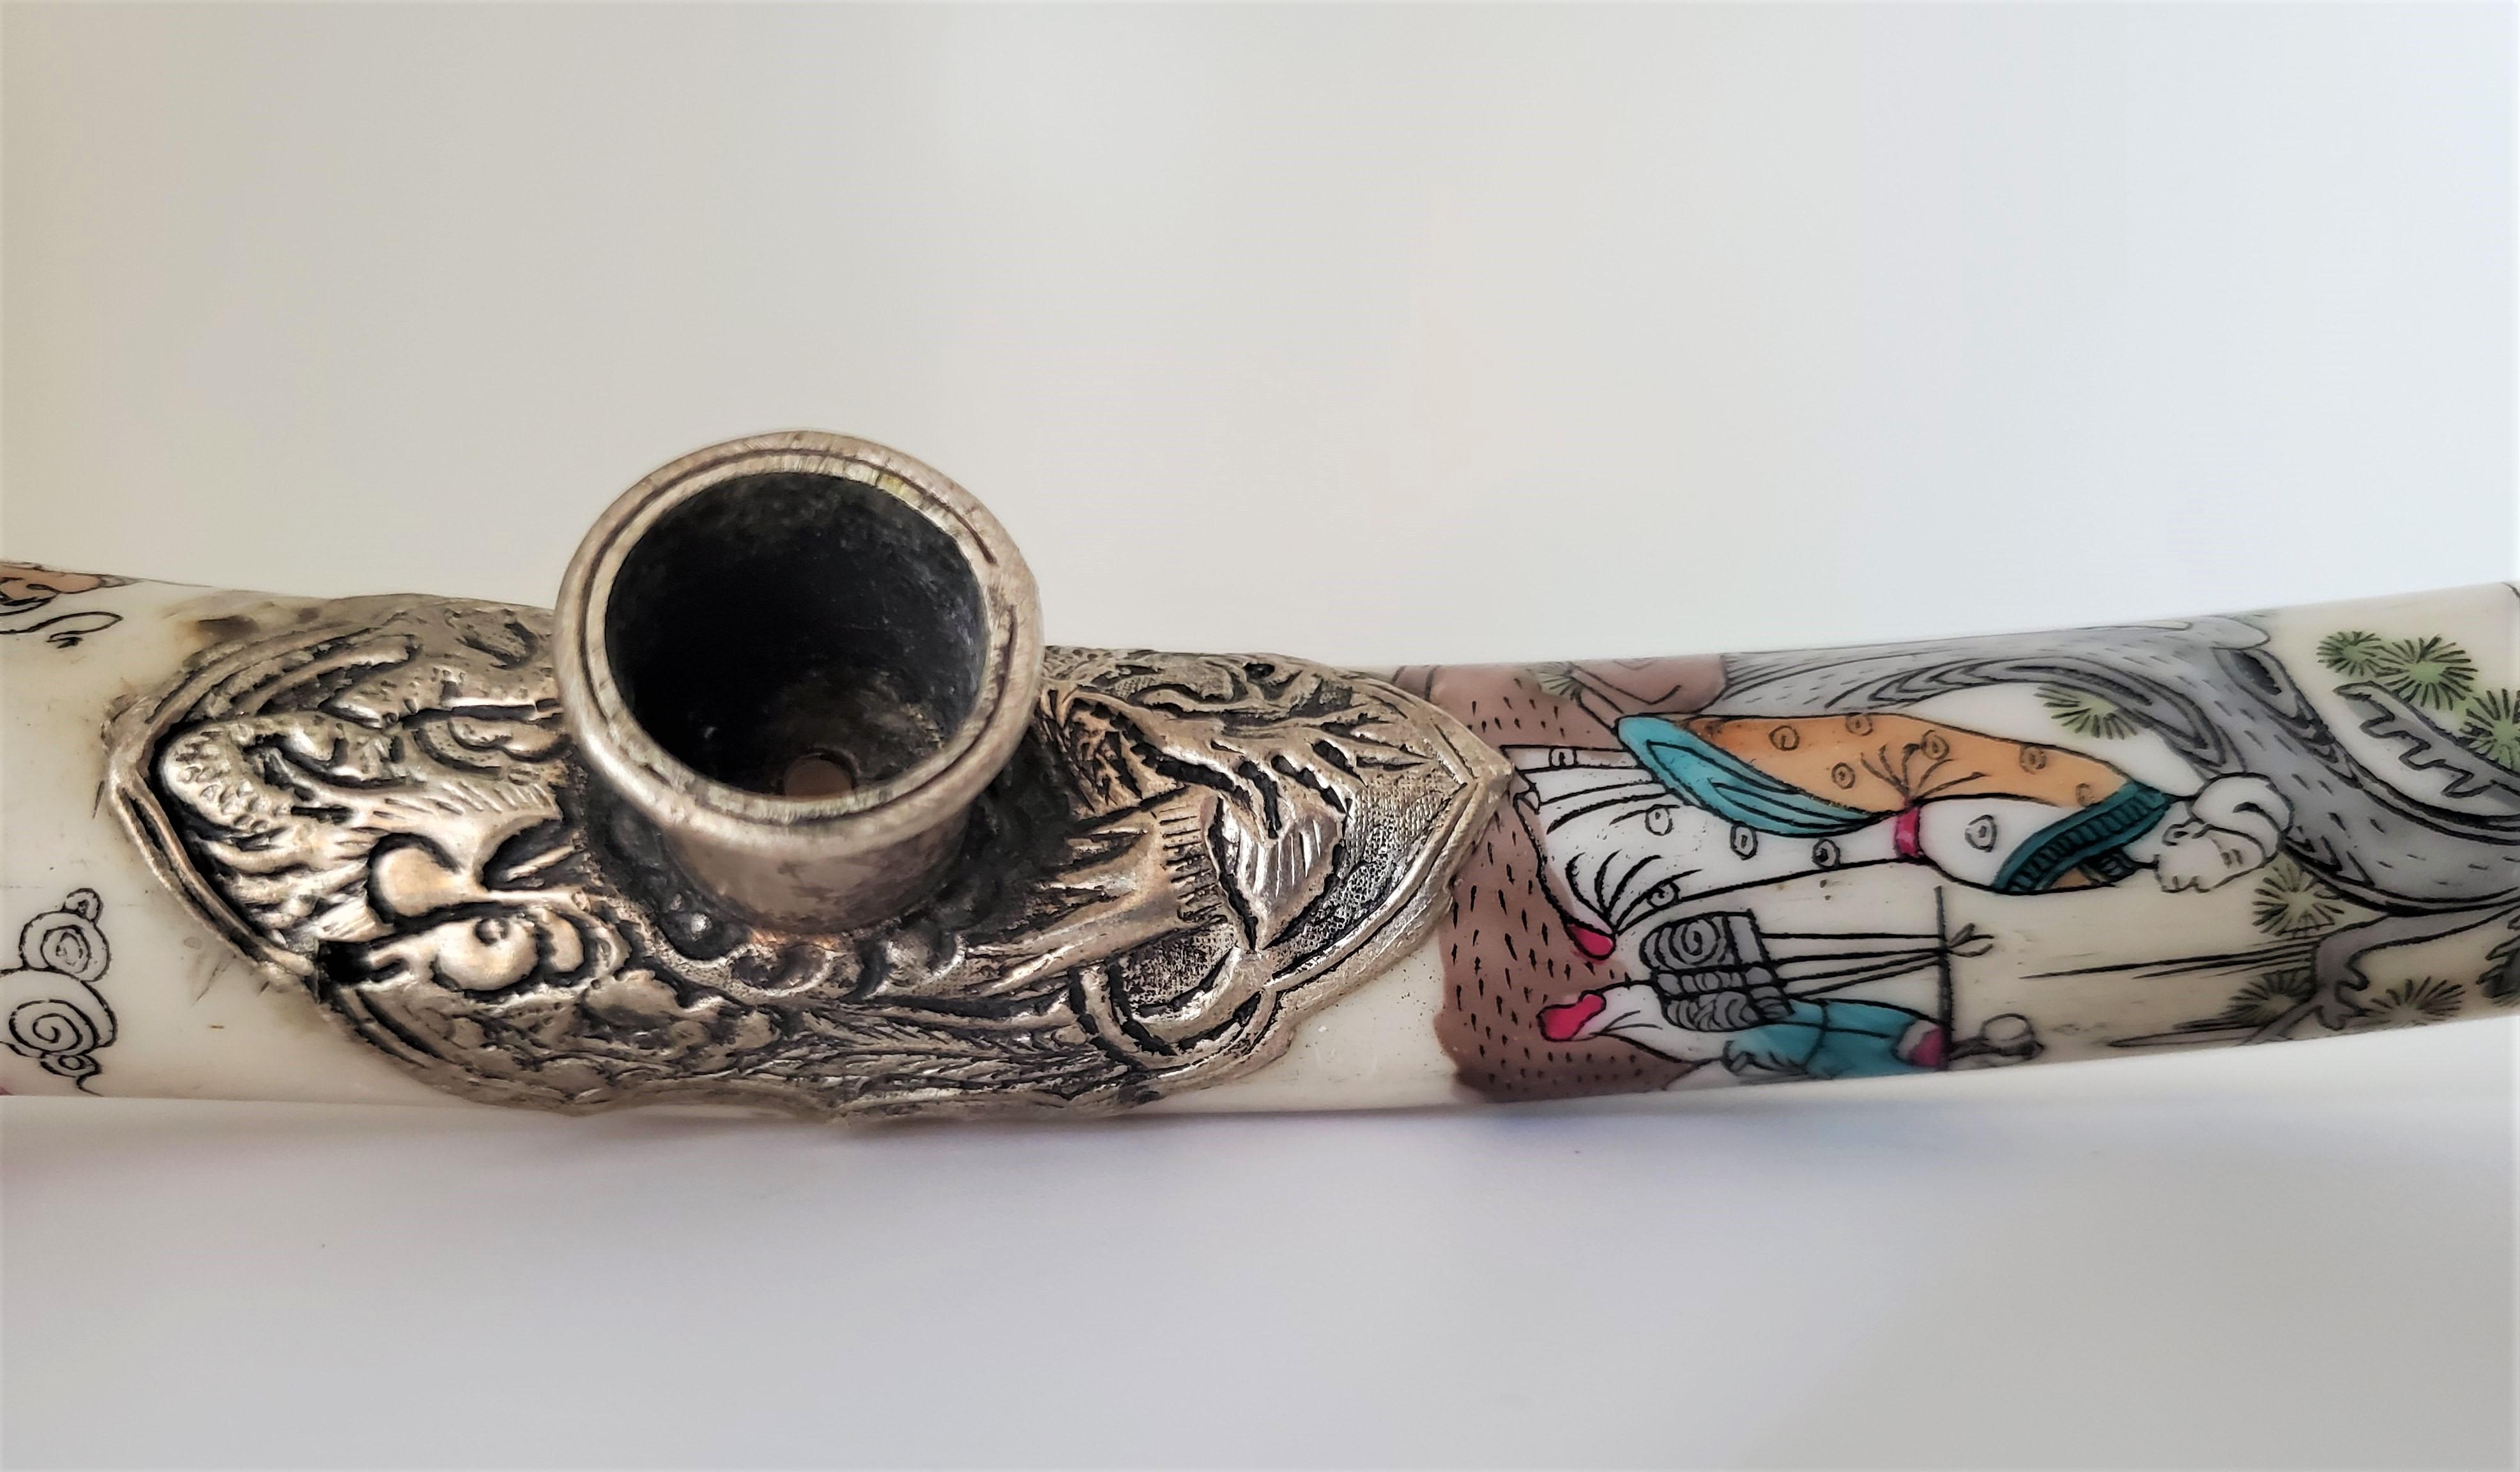 Chinese Export Vintage Signed Chinese Opium Pipe Made with Bone and Silver Metal Detailing